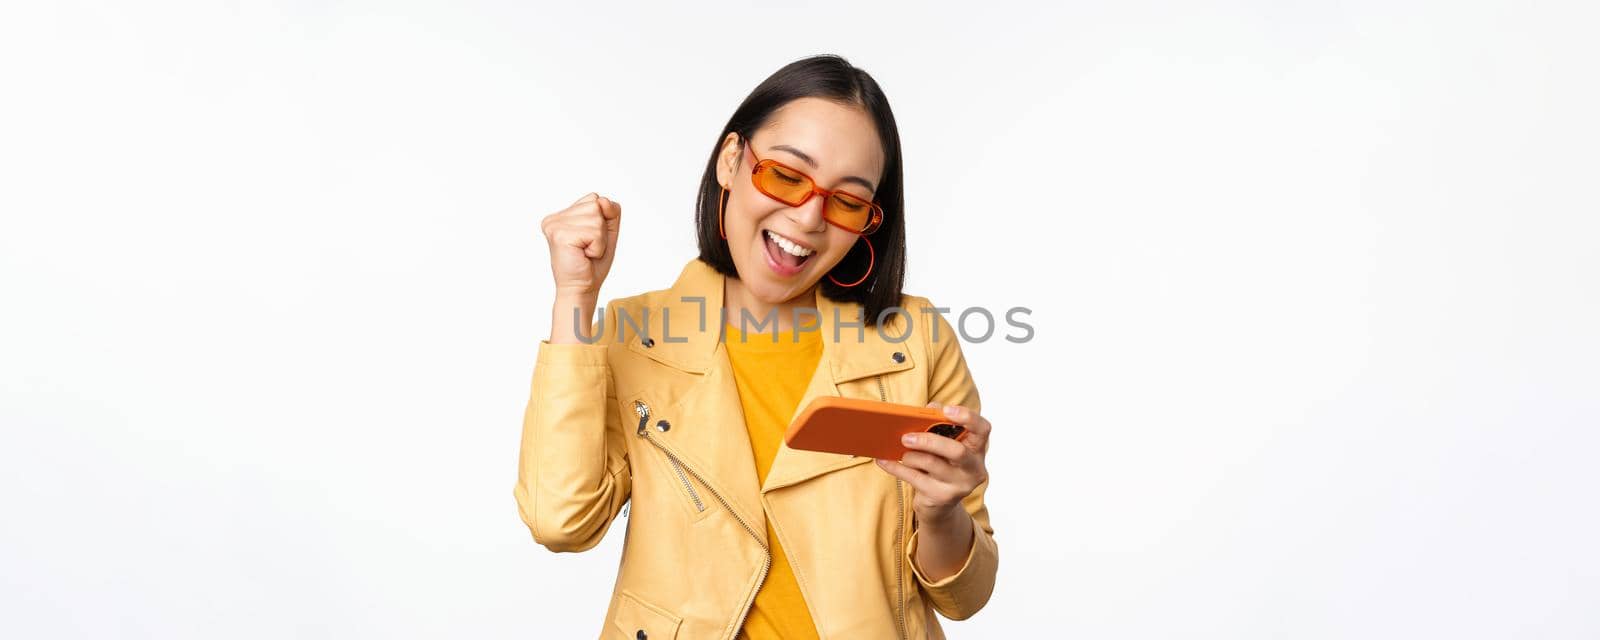 Stylish korean girl in sunglasses, playing mobile video game, laughing and smiling while using smartphone, standing over white background.